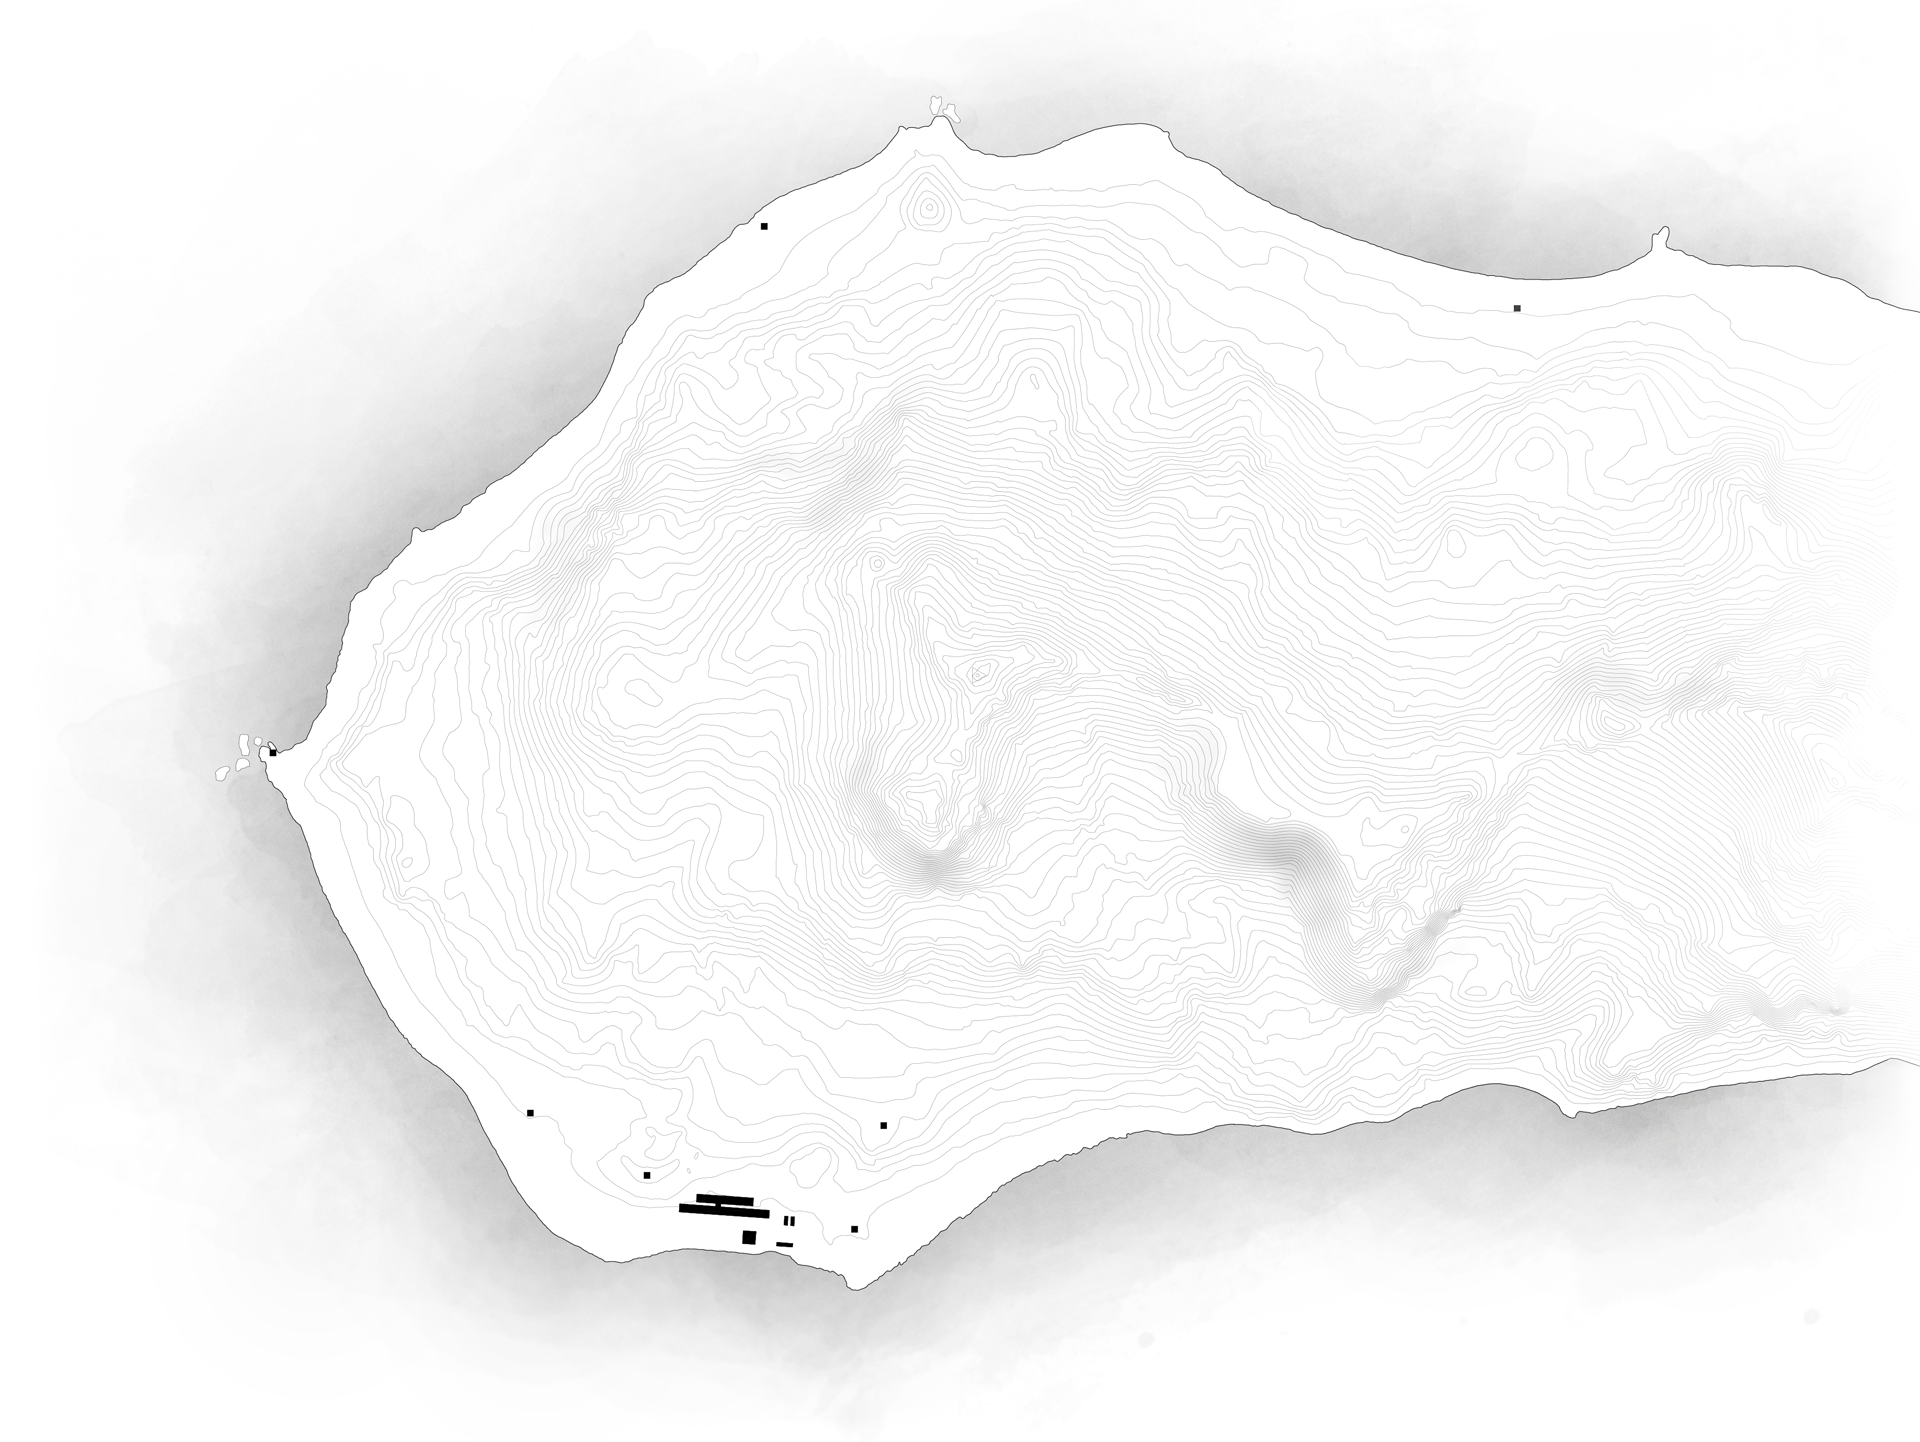 Topographic map of the Keller Peninsula, highlighting scale of the station